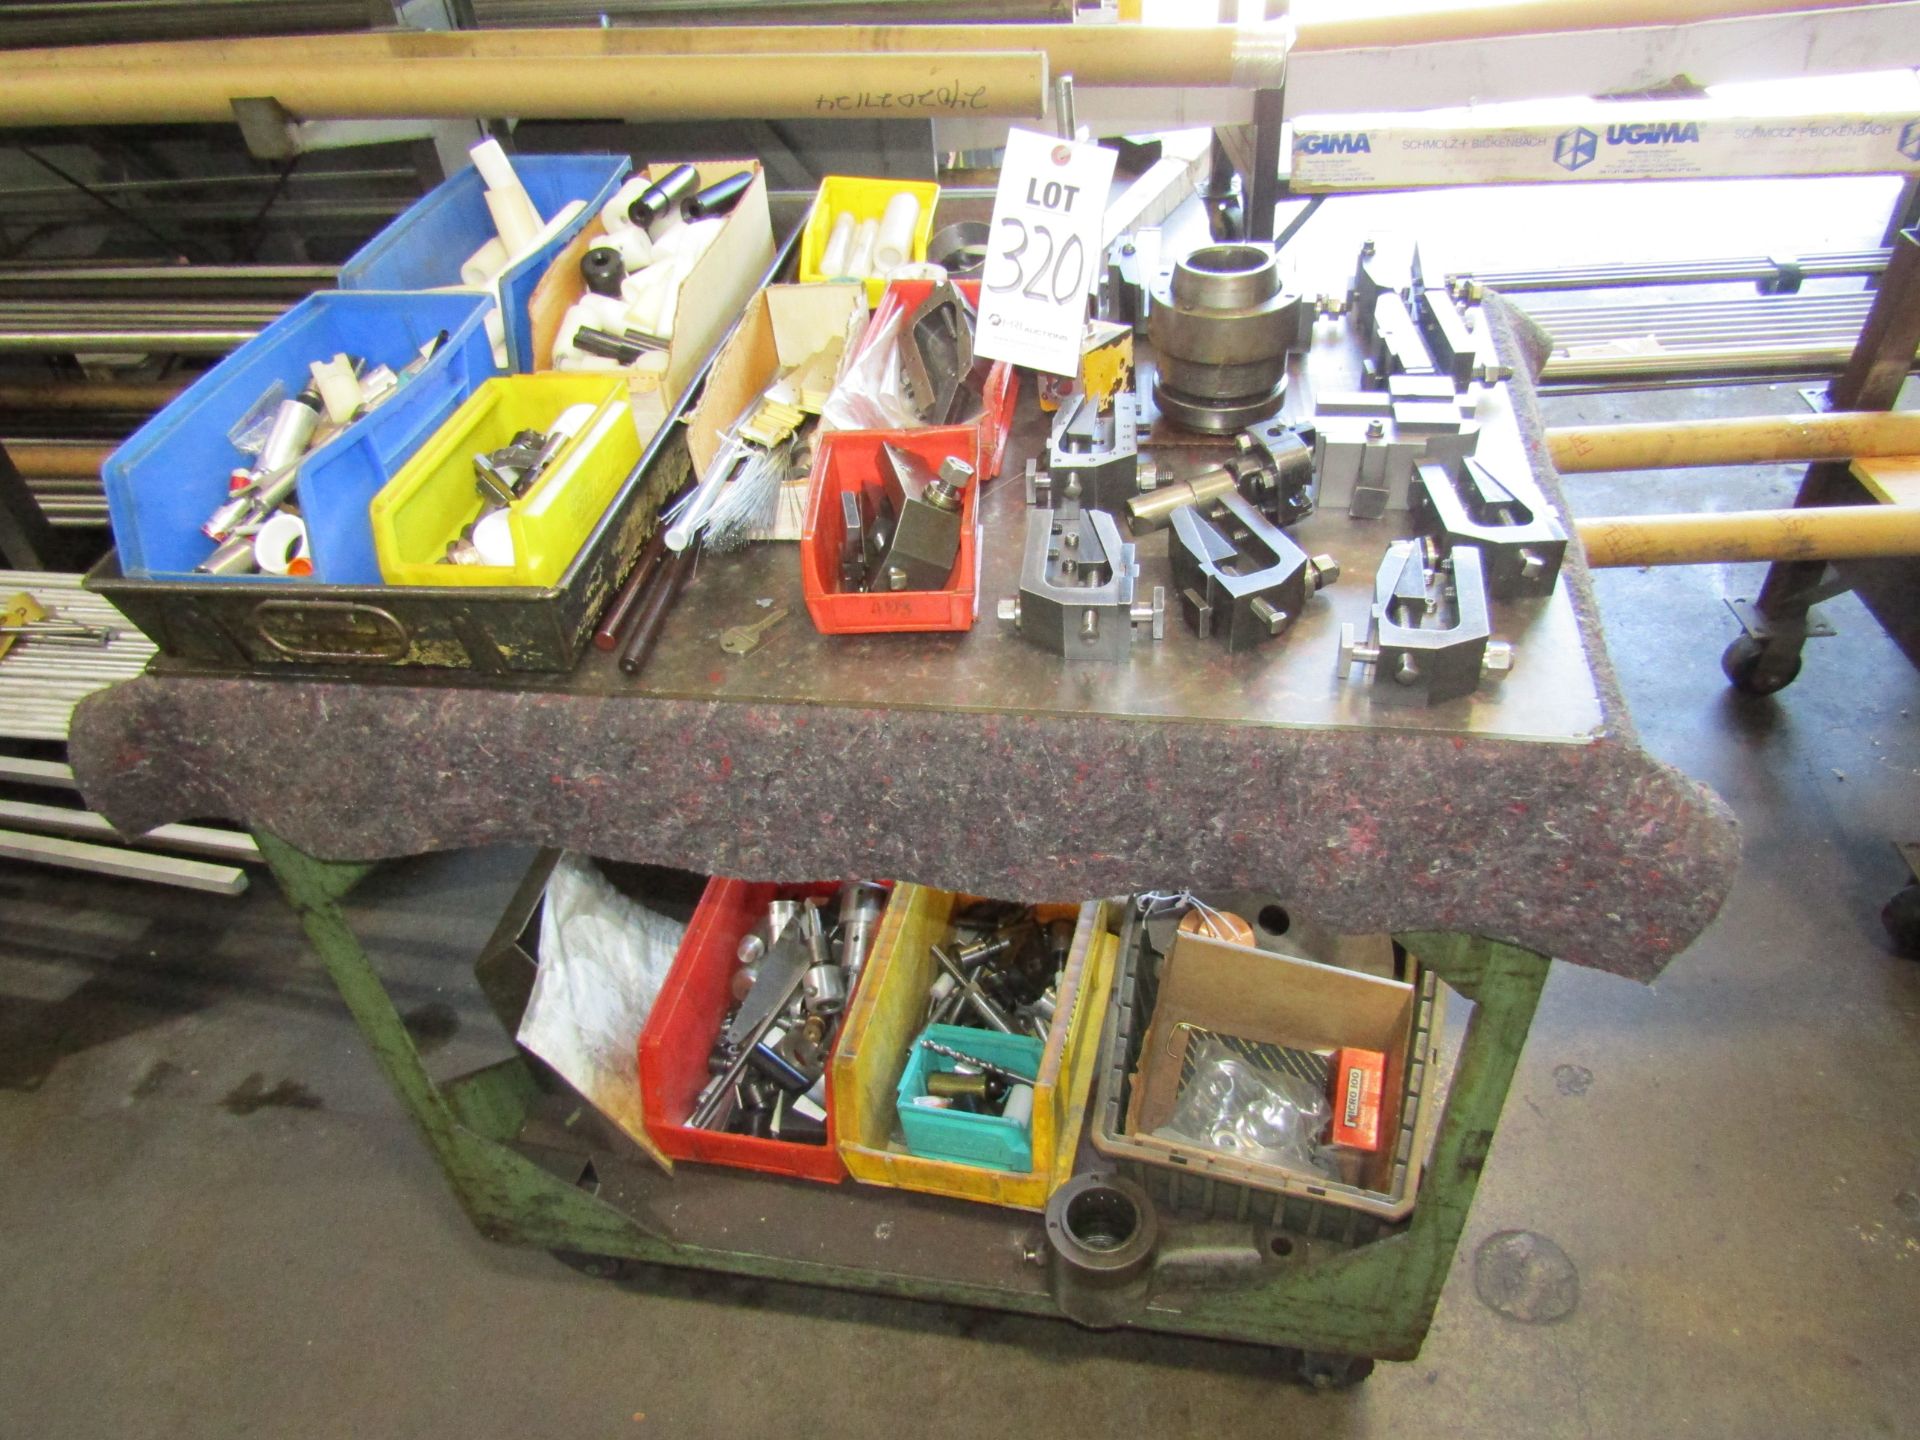 STEEL SHOP CART WITH CONTENTS: MISC. TOOL HOLDERS, PARTS, TOOLING